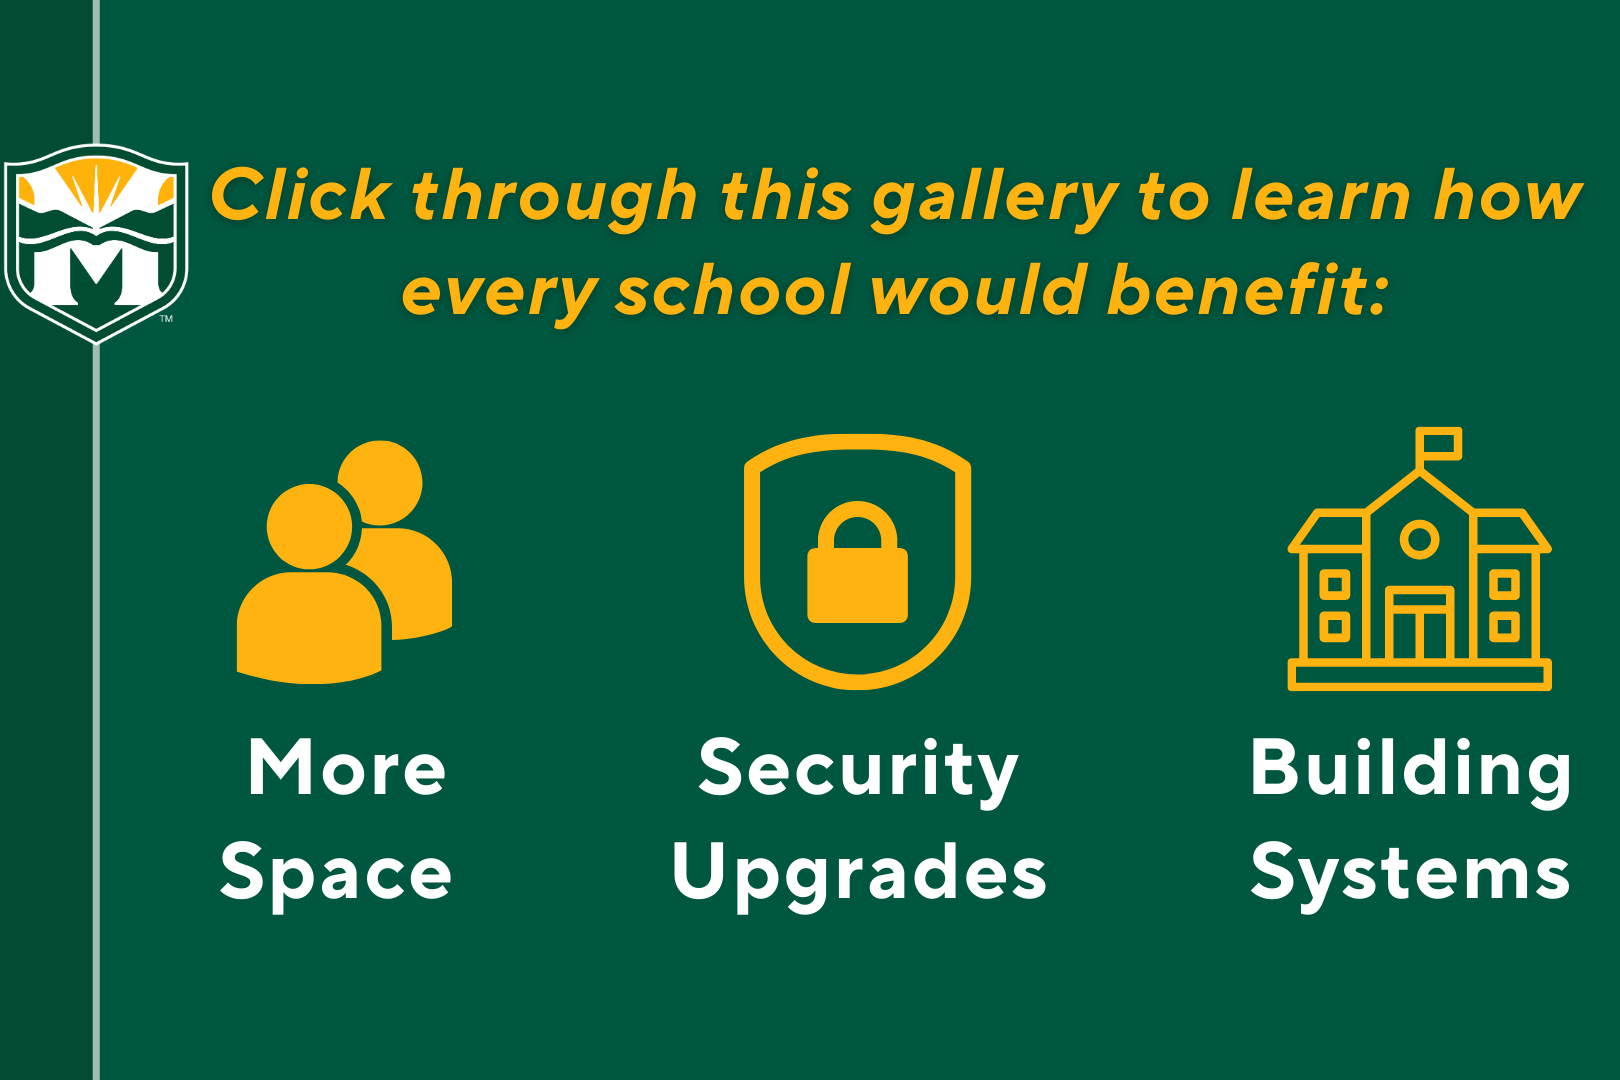 Click through this gallery to learn how every school would benefit: More Space, Security Upgrades, Building Systems